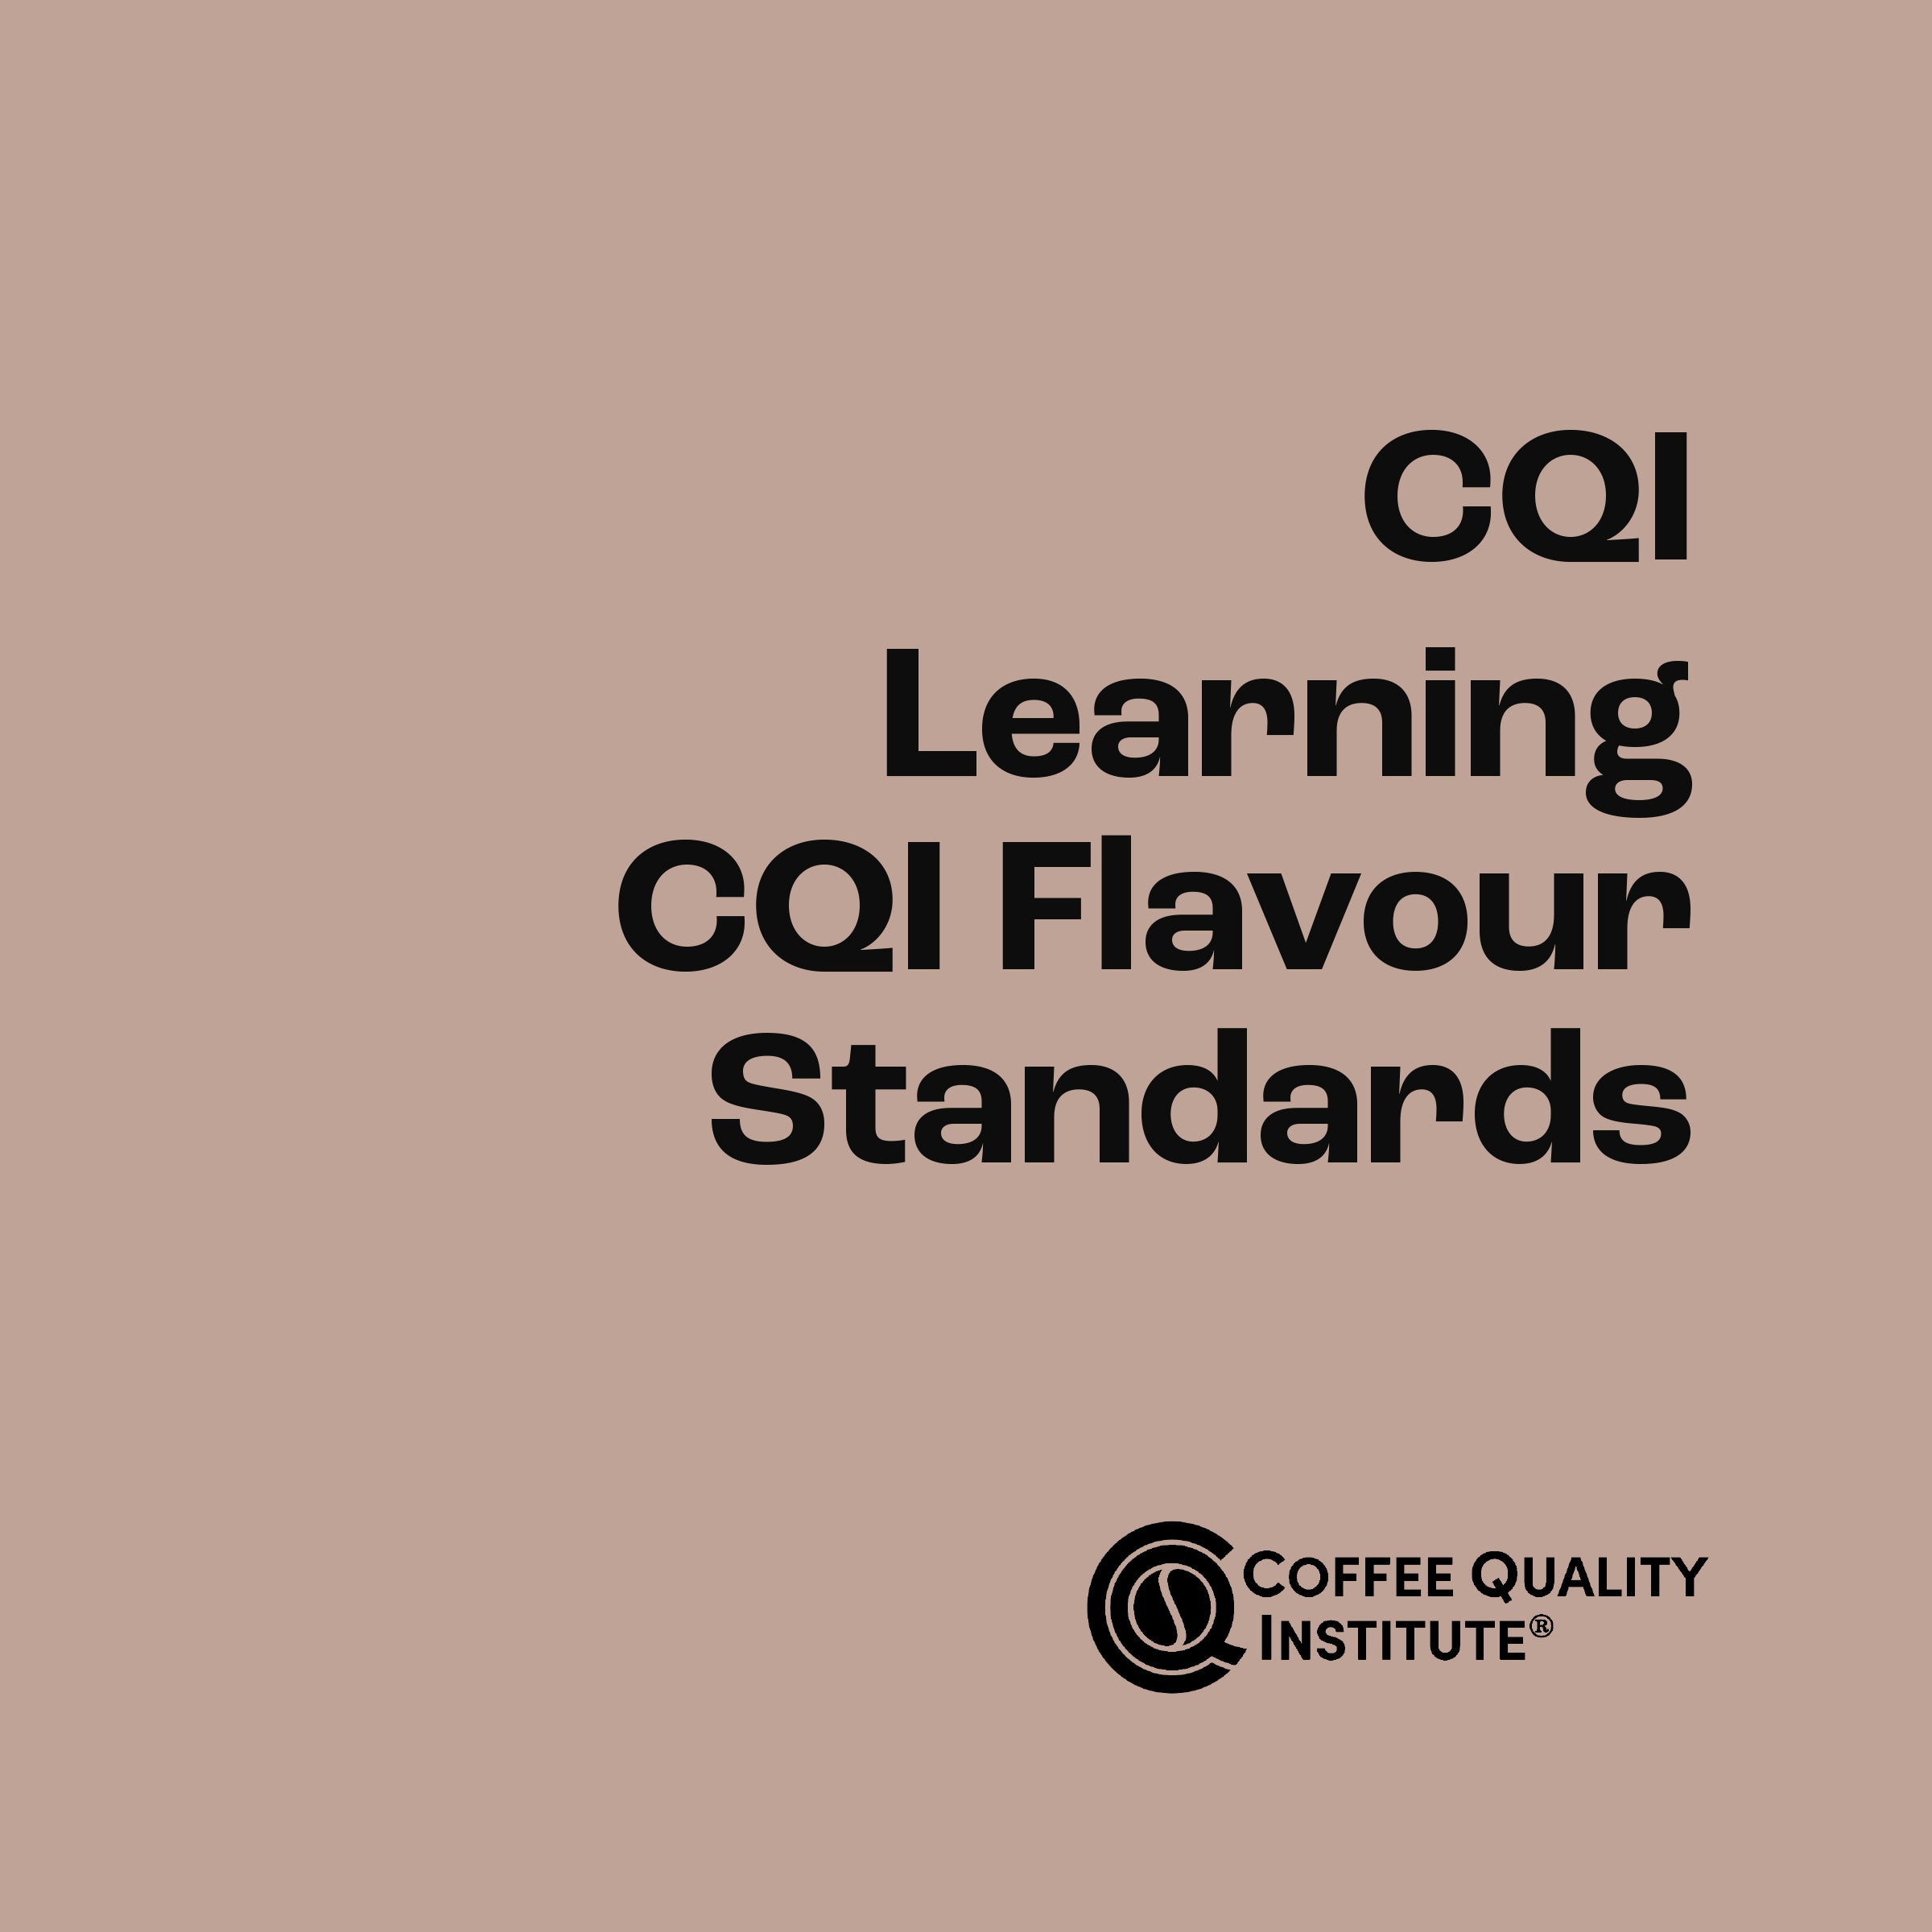 CQI: Learning CQI Flavour Standards